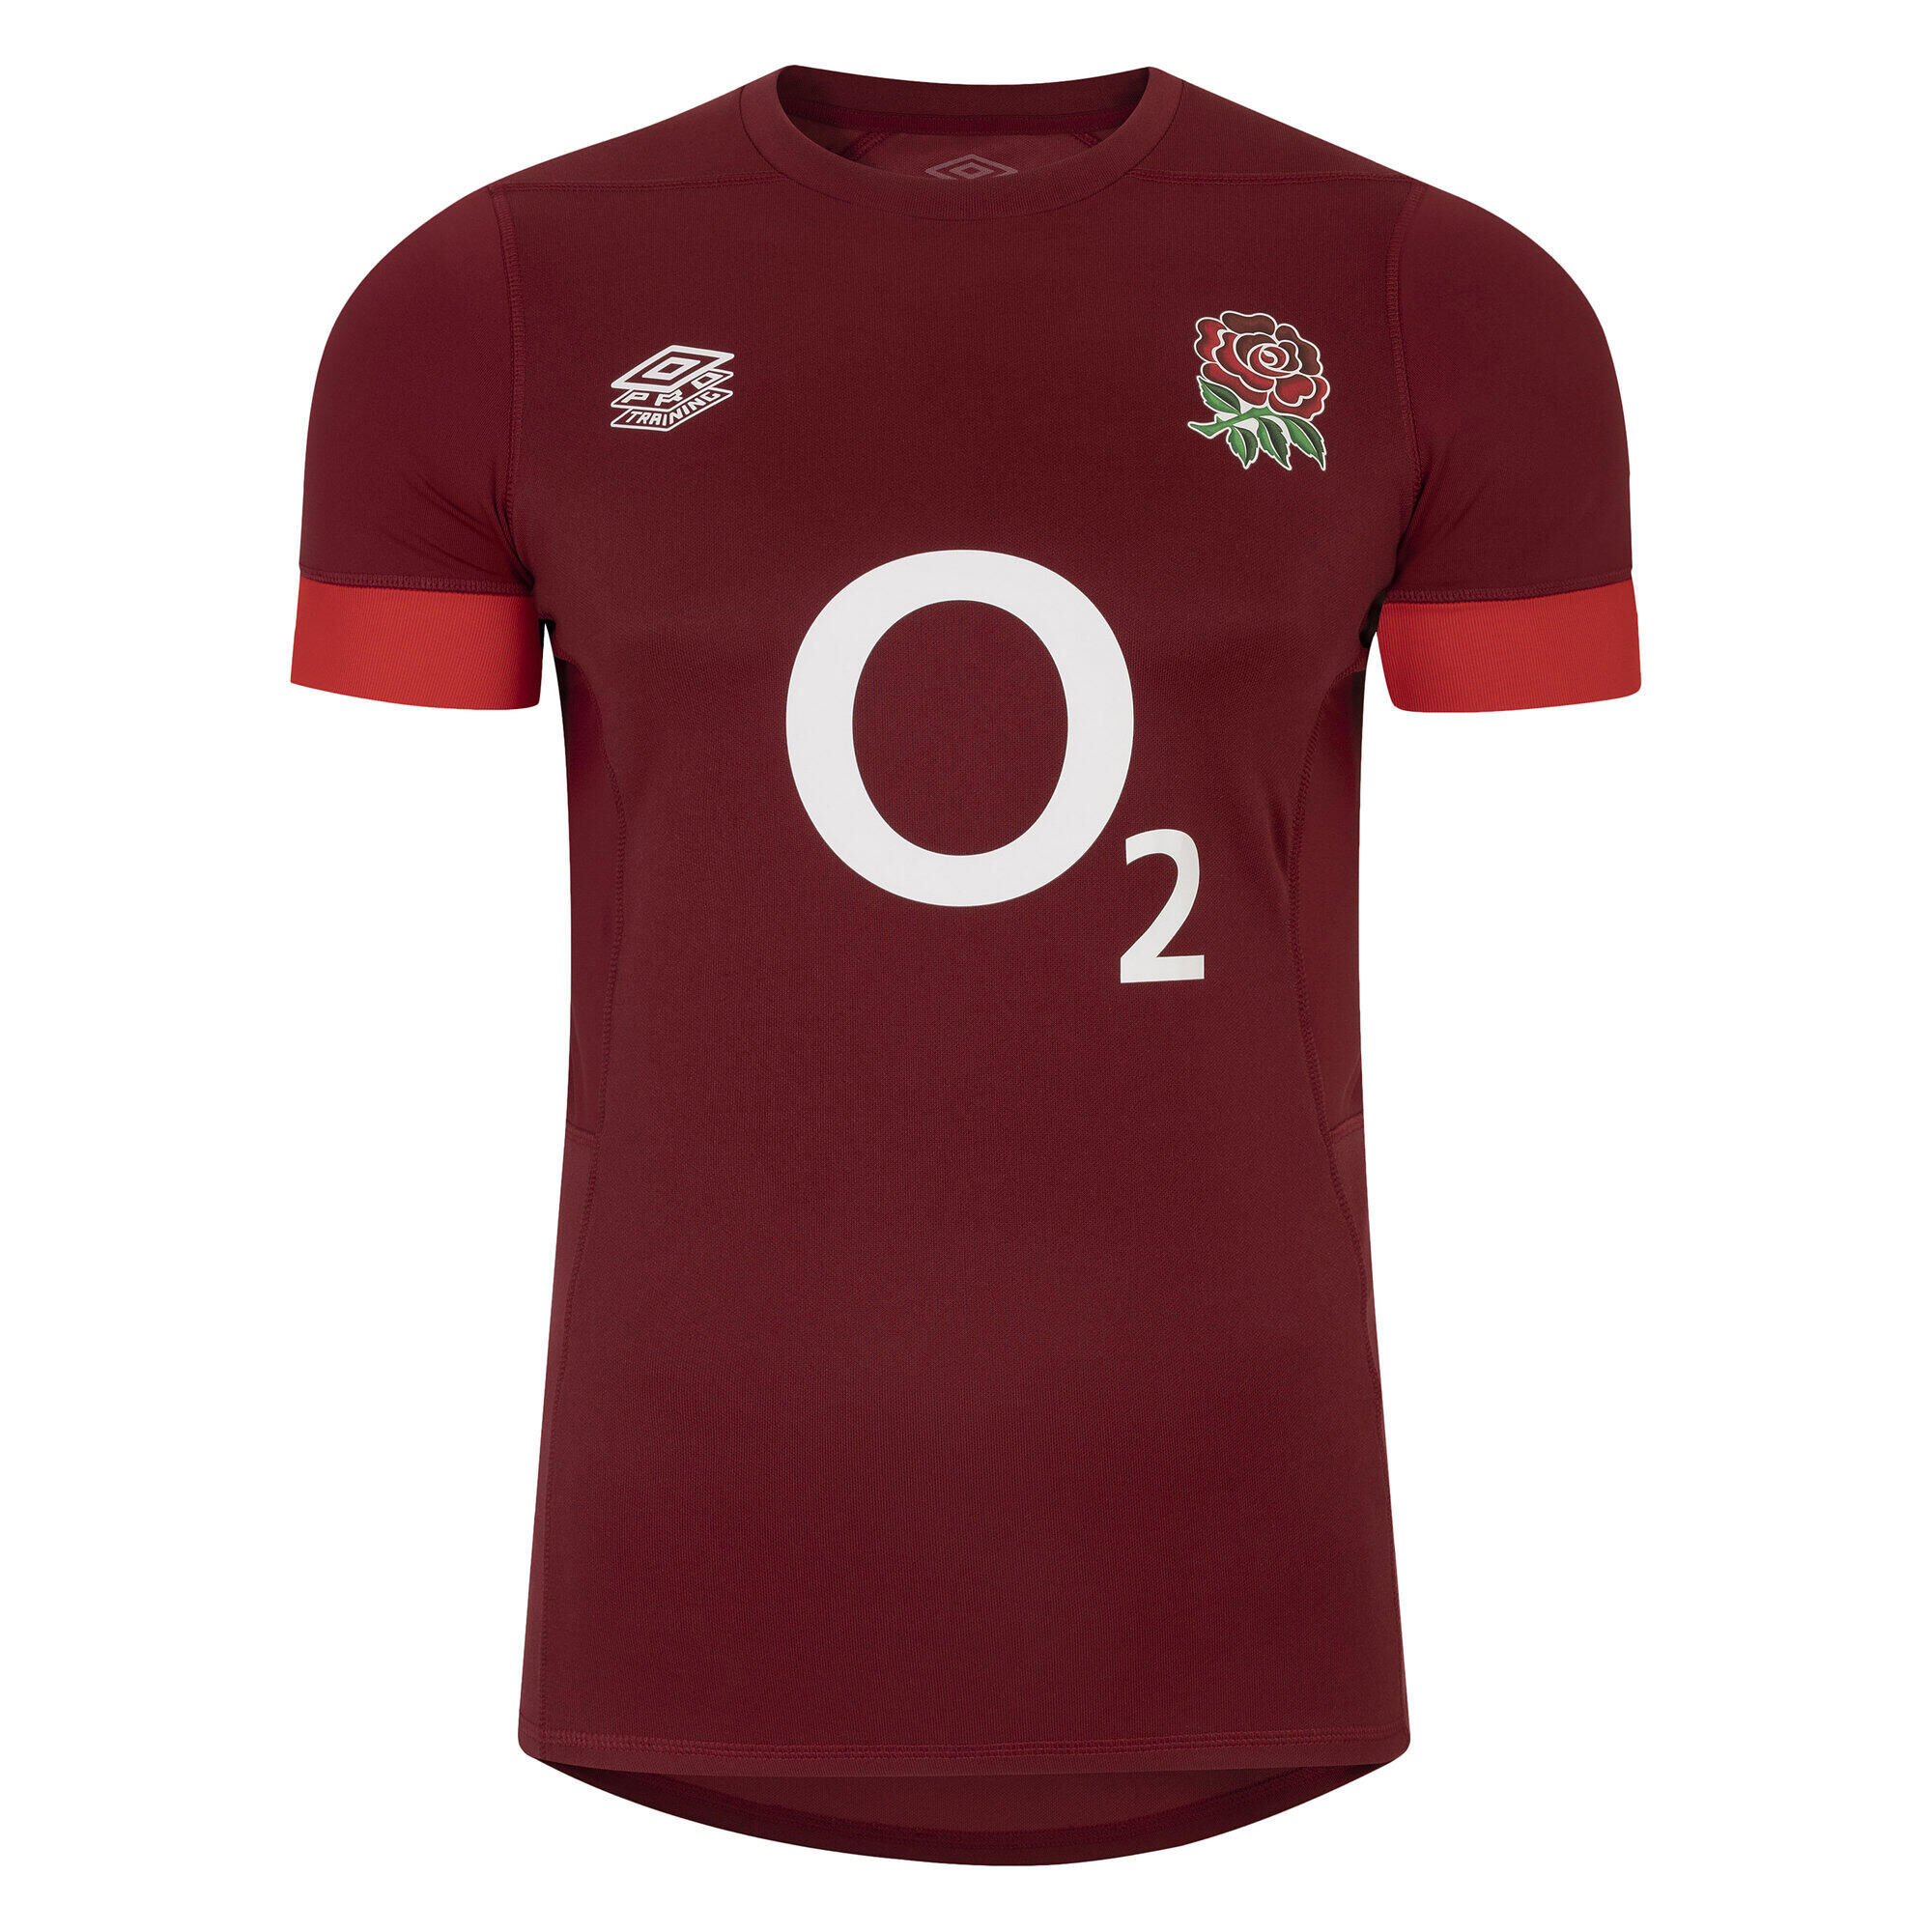 UMBRO Mens 23/24 England Rugby Training Contact Jersey (Tibetan Red/Flame Scarlet)